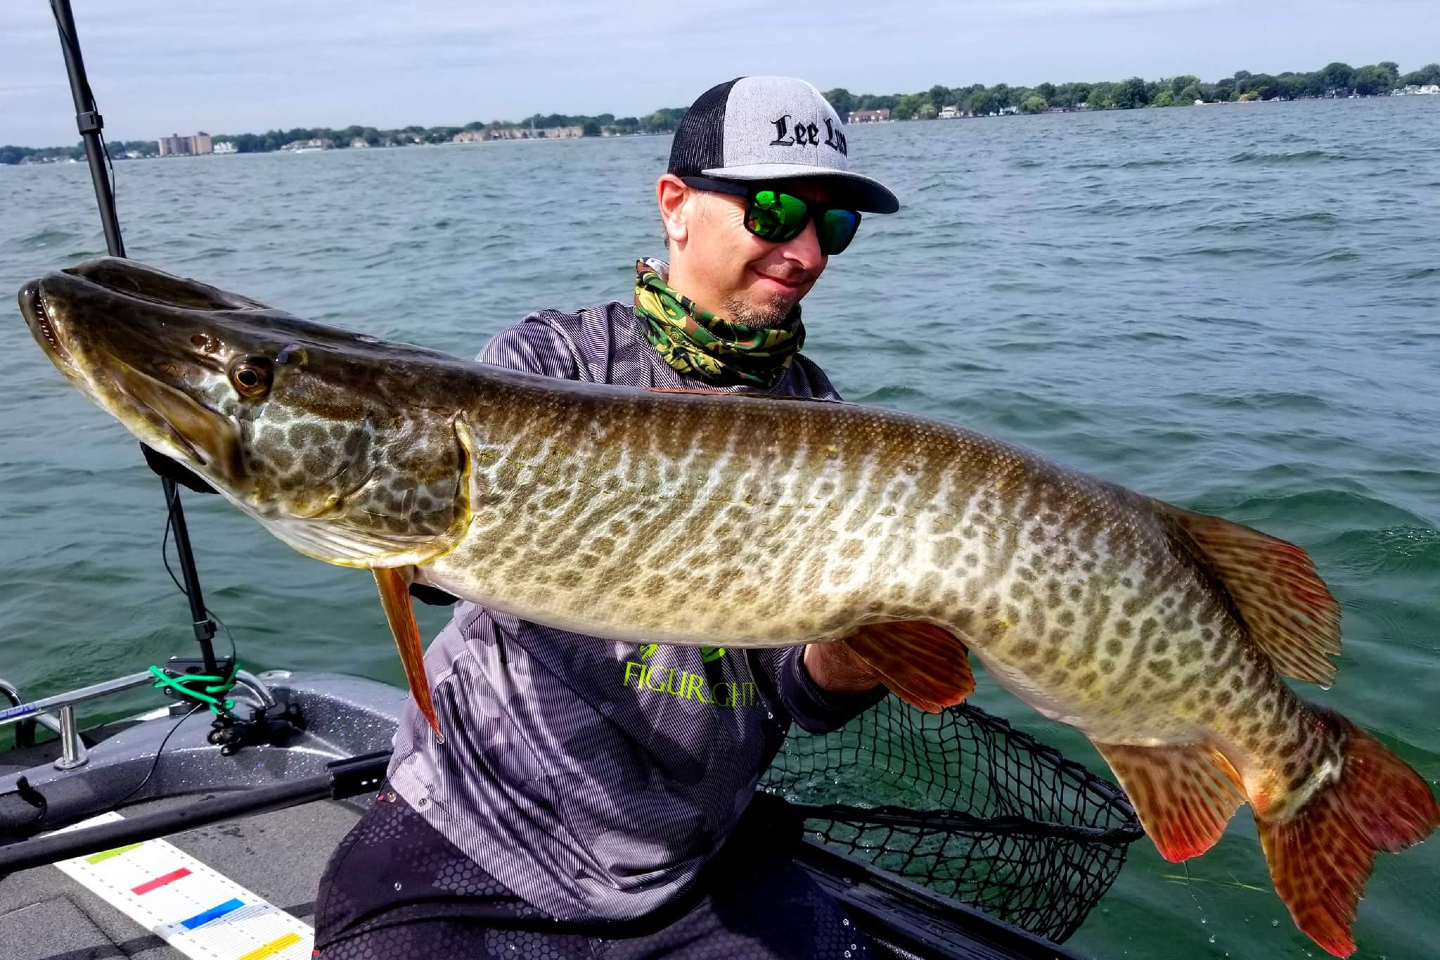 A fisherman in a cap and shades holding a large Tiger Muskie fish with water in the background.